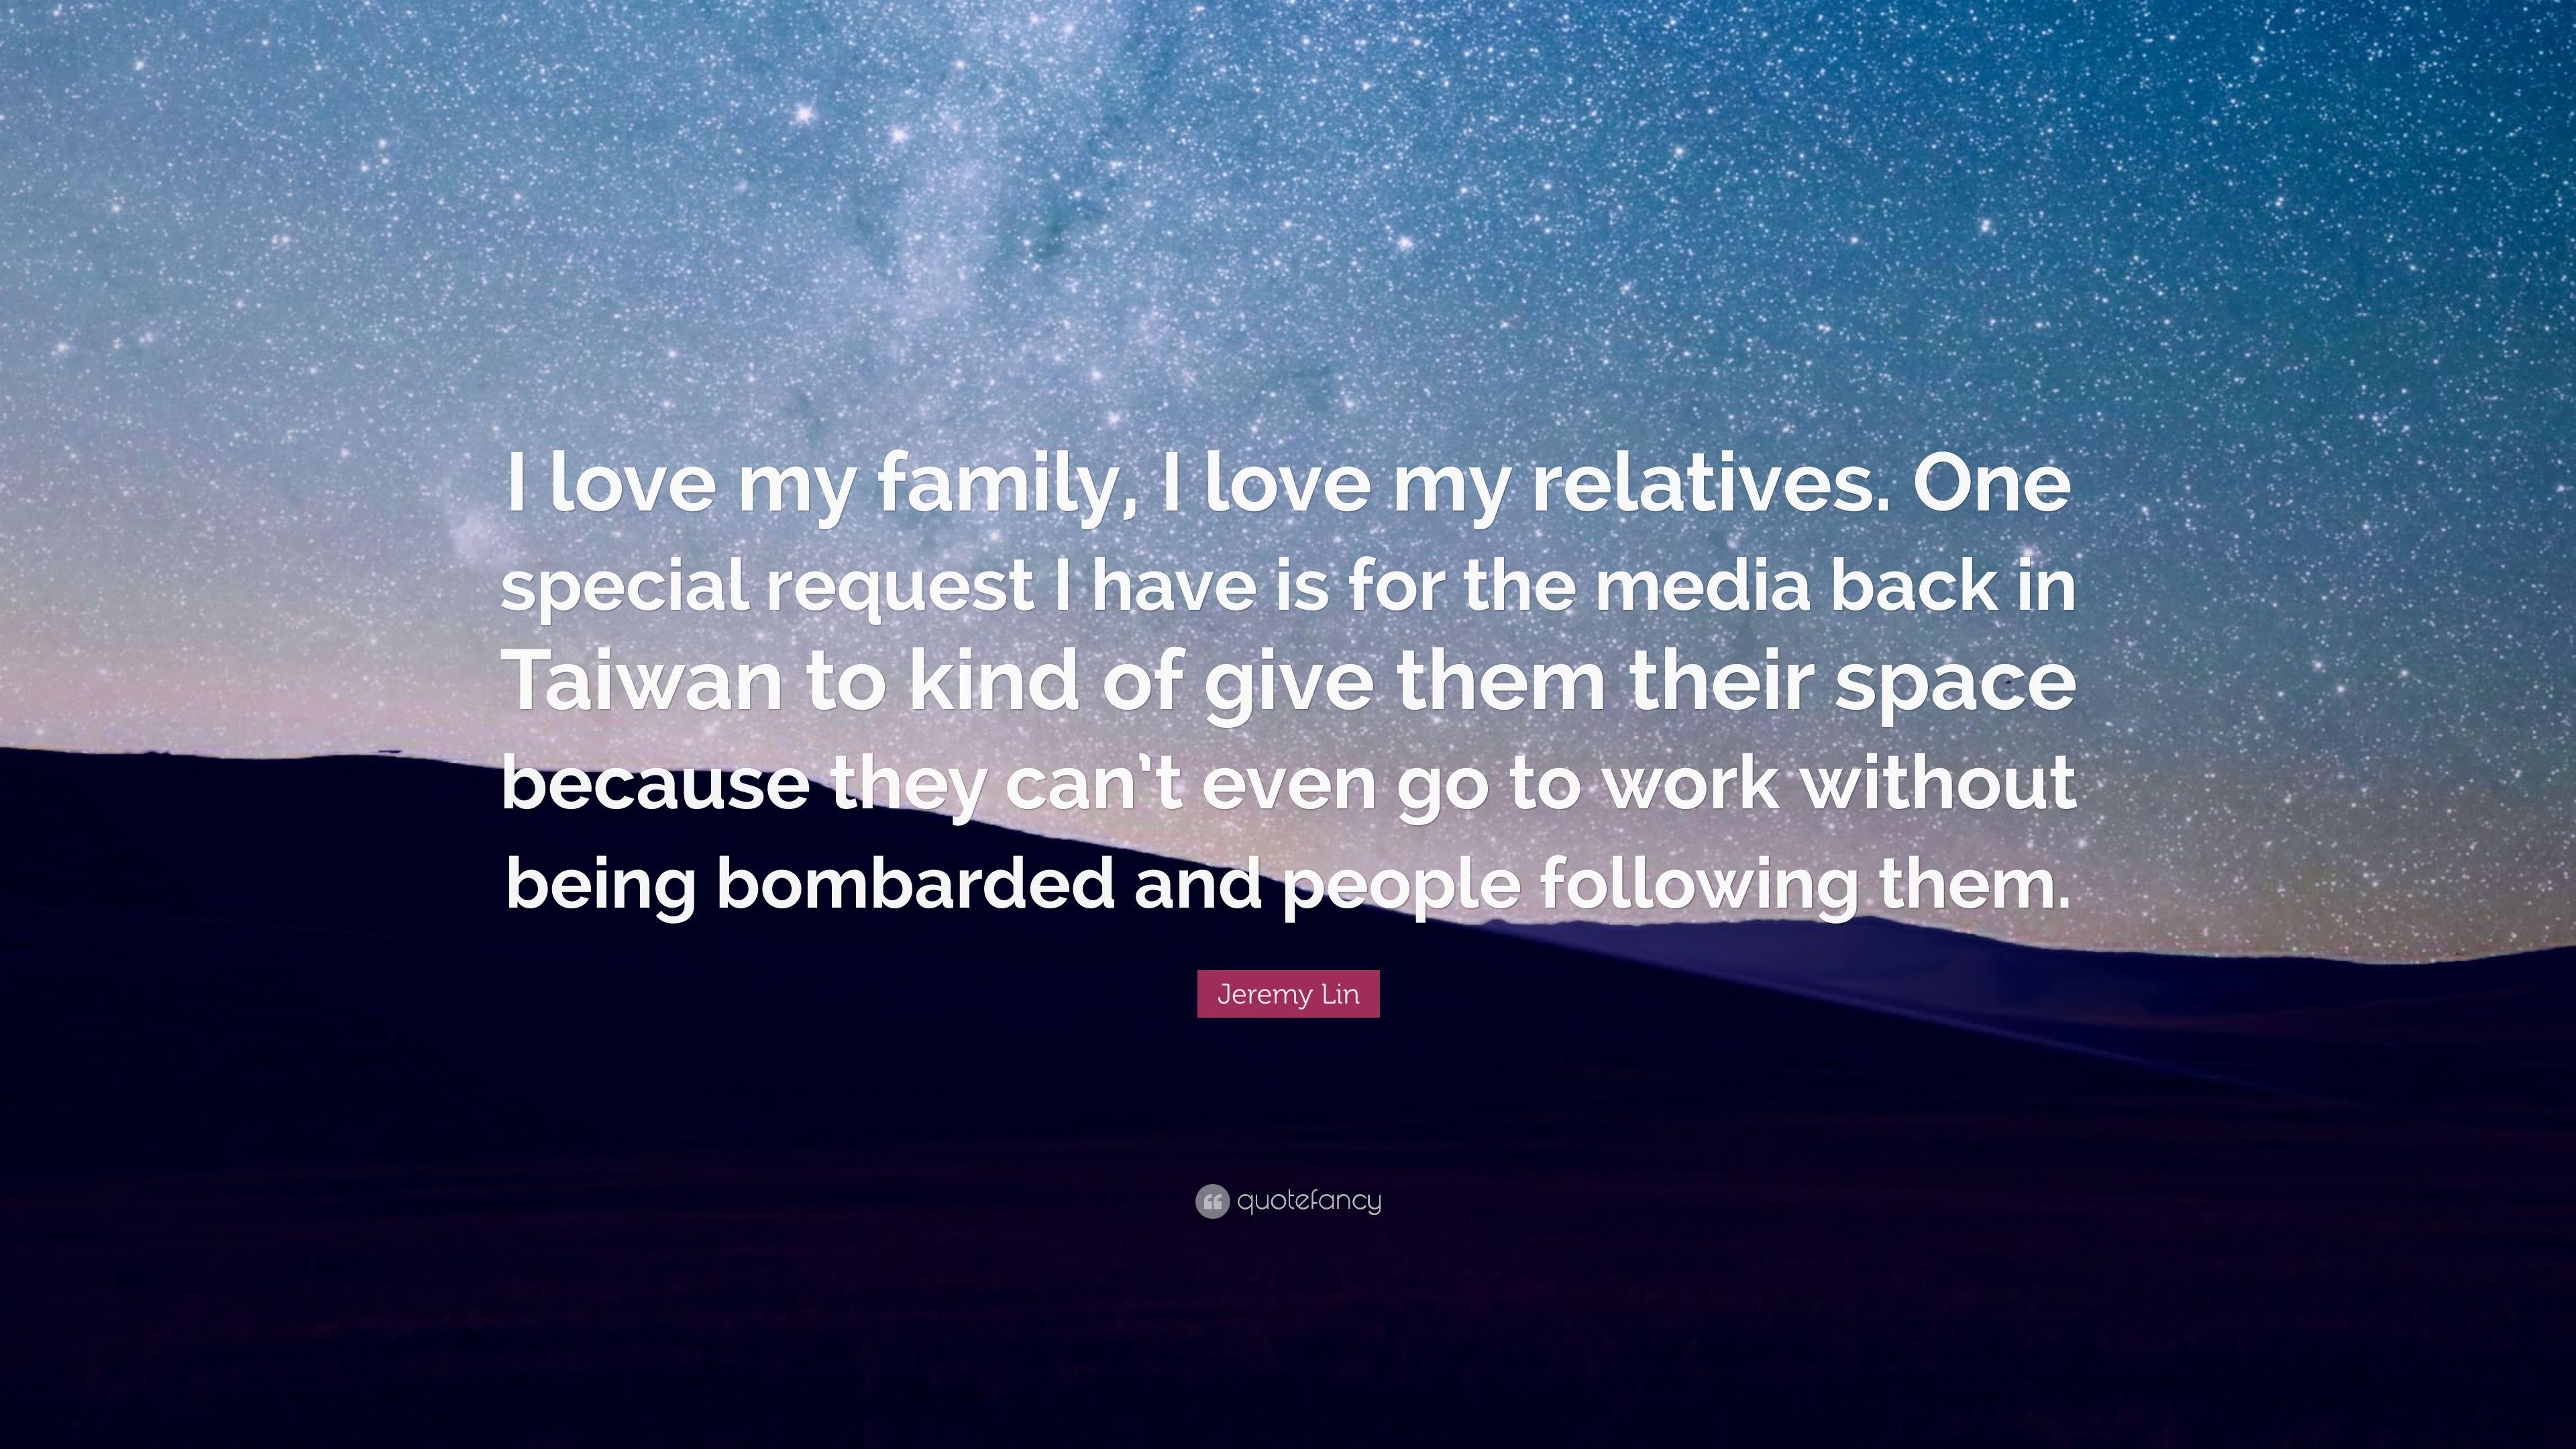 Jeremy Lin Quote: “I love my family, I love my relatives. One